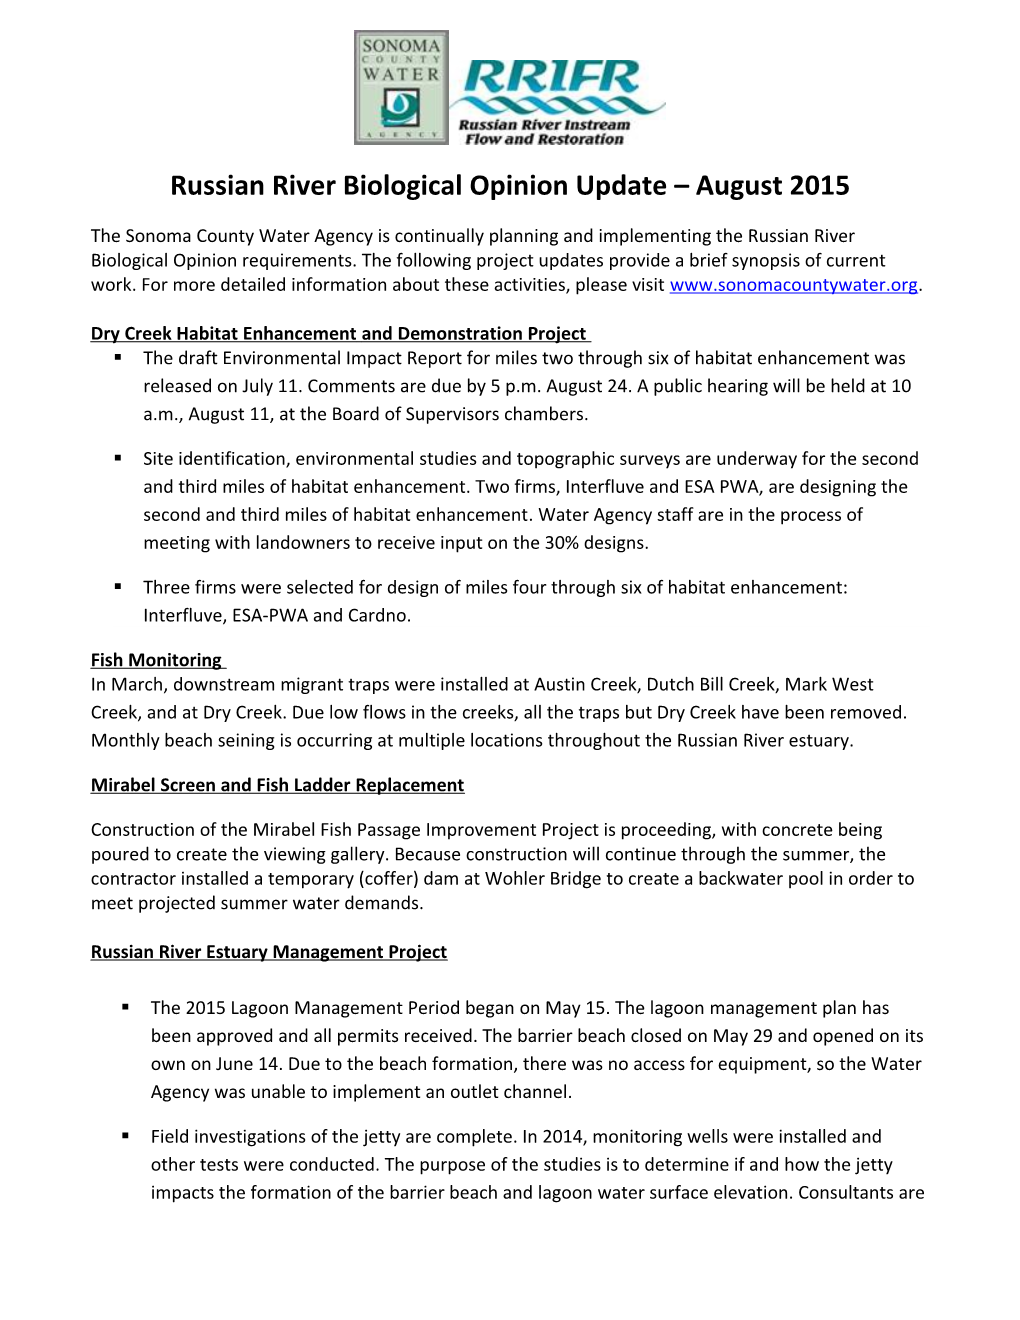 Russian River Biological Opinion Update August 2015